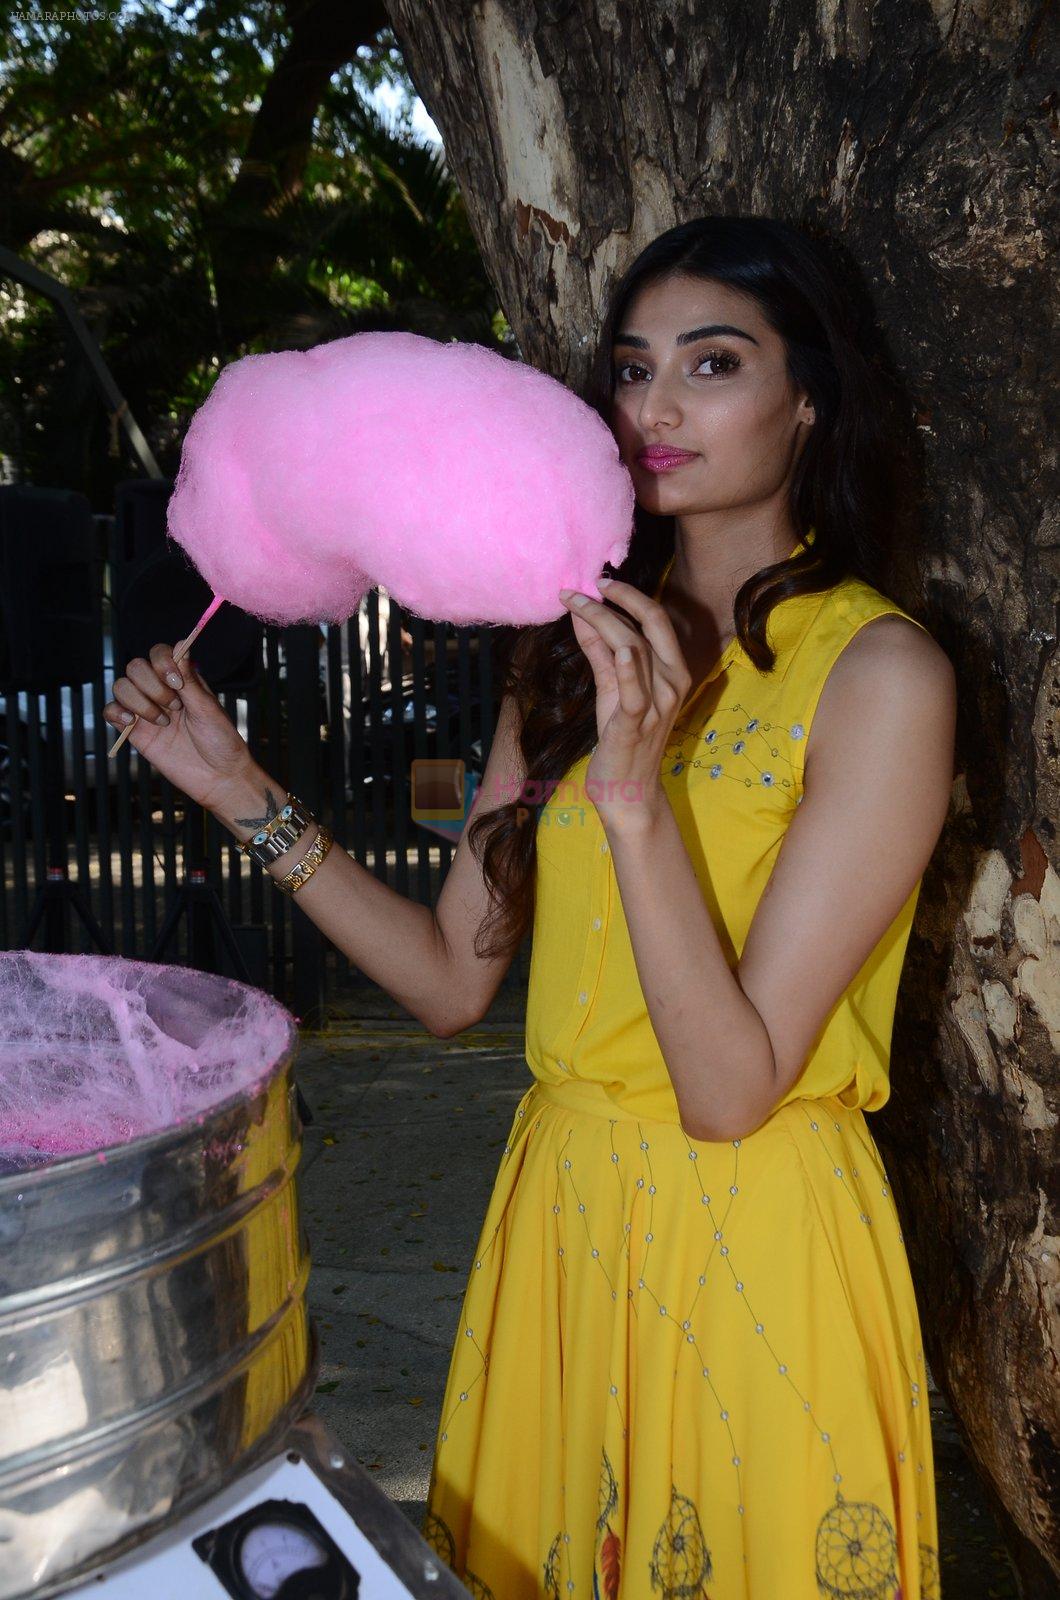 Athiya Shetty at Nishka Lulla's collection launch on 22nd March 2016